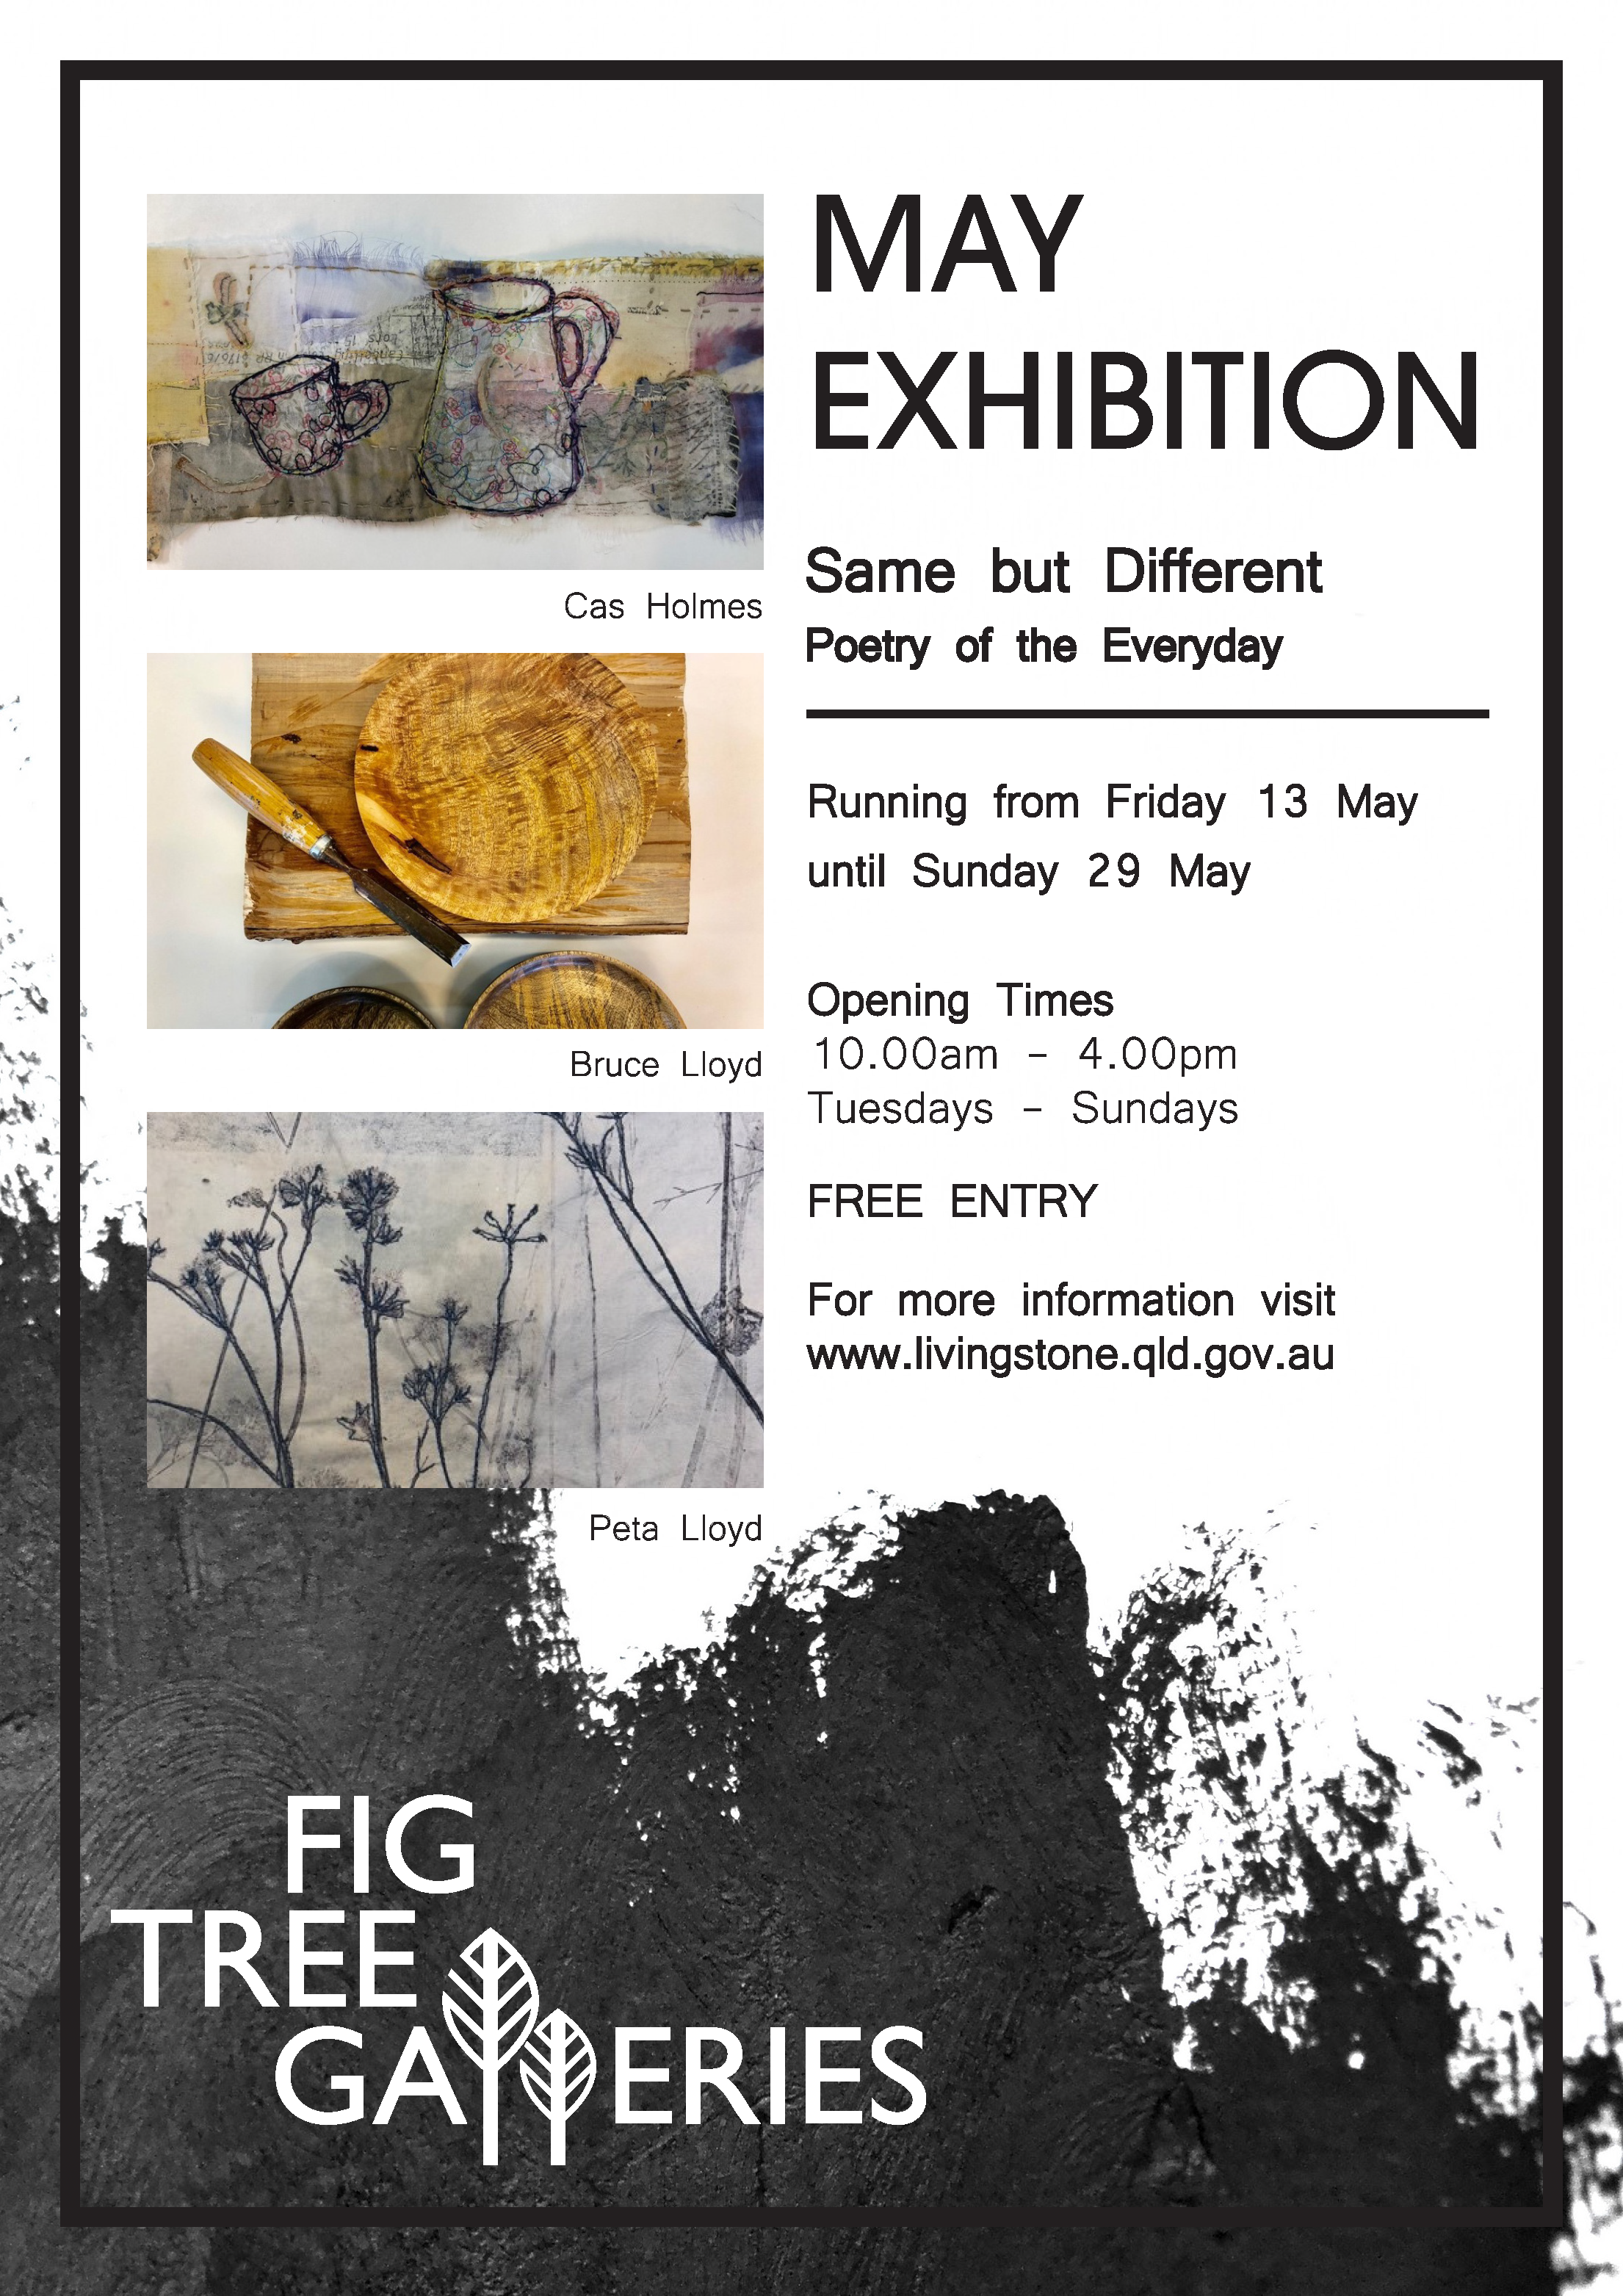 Fig tree galleries exhibition same but different